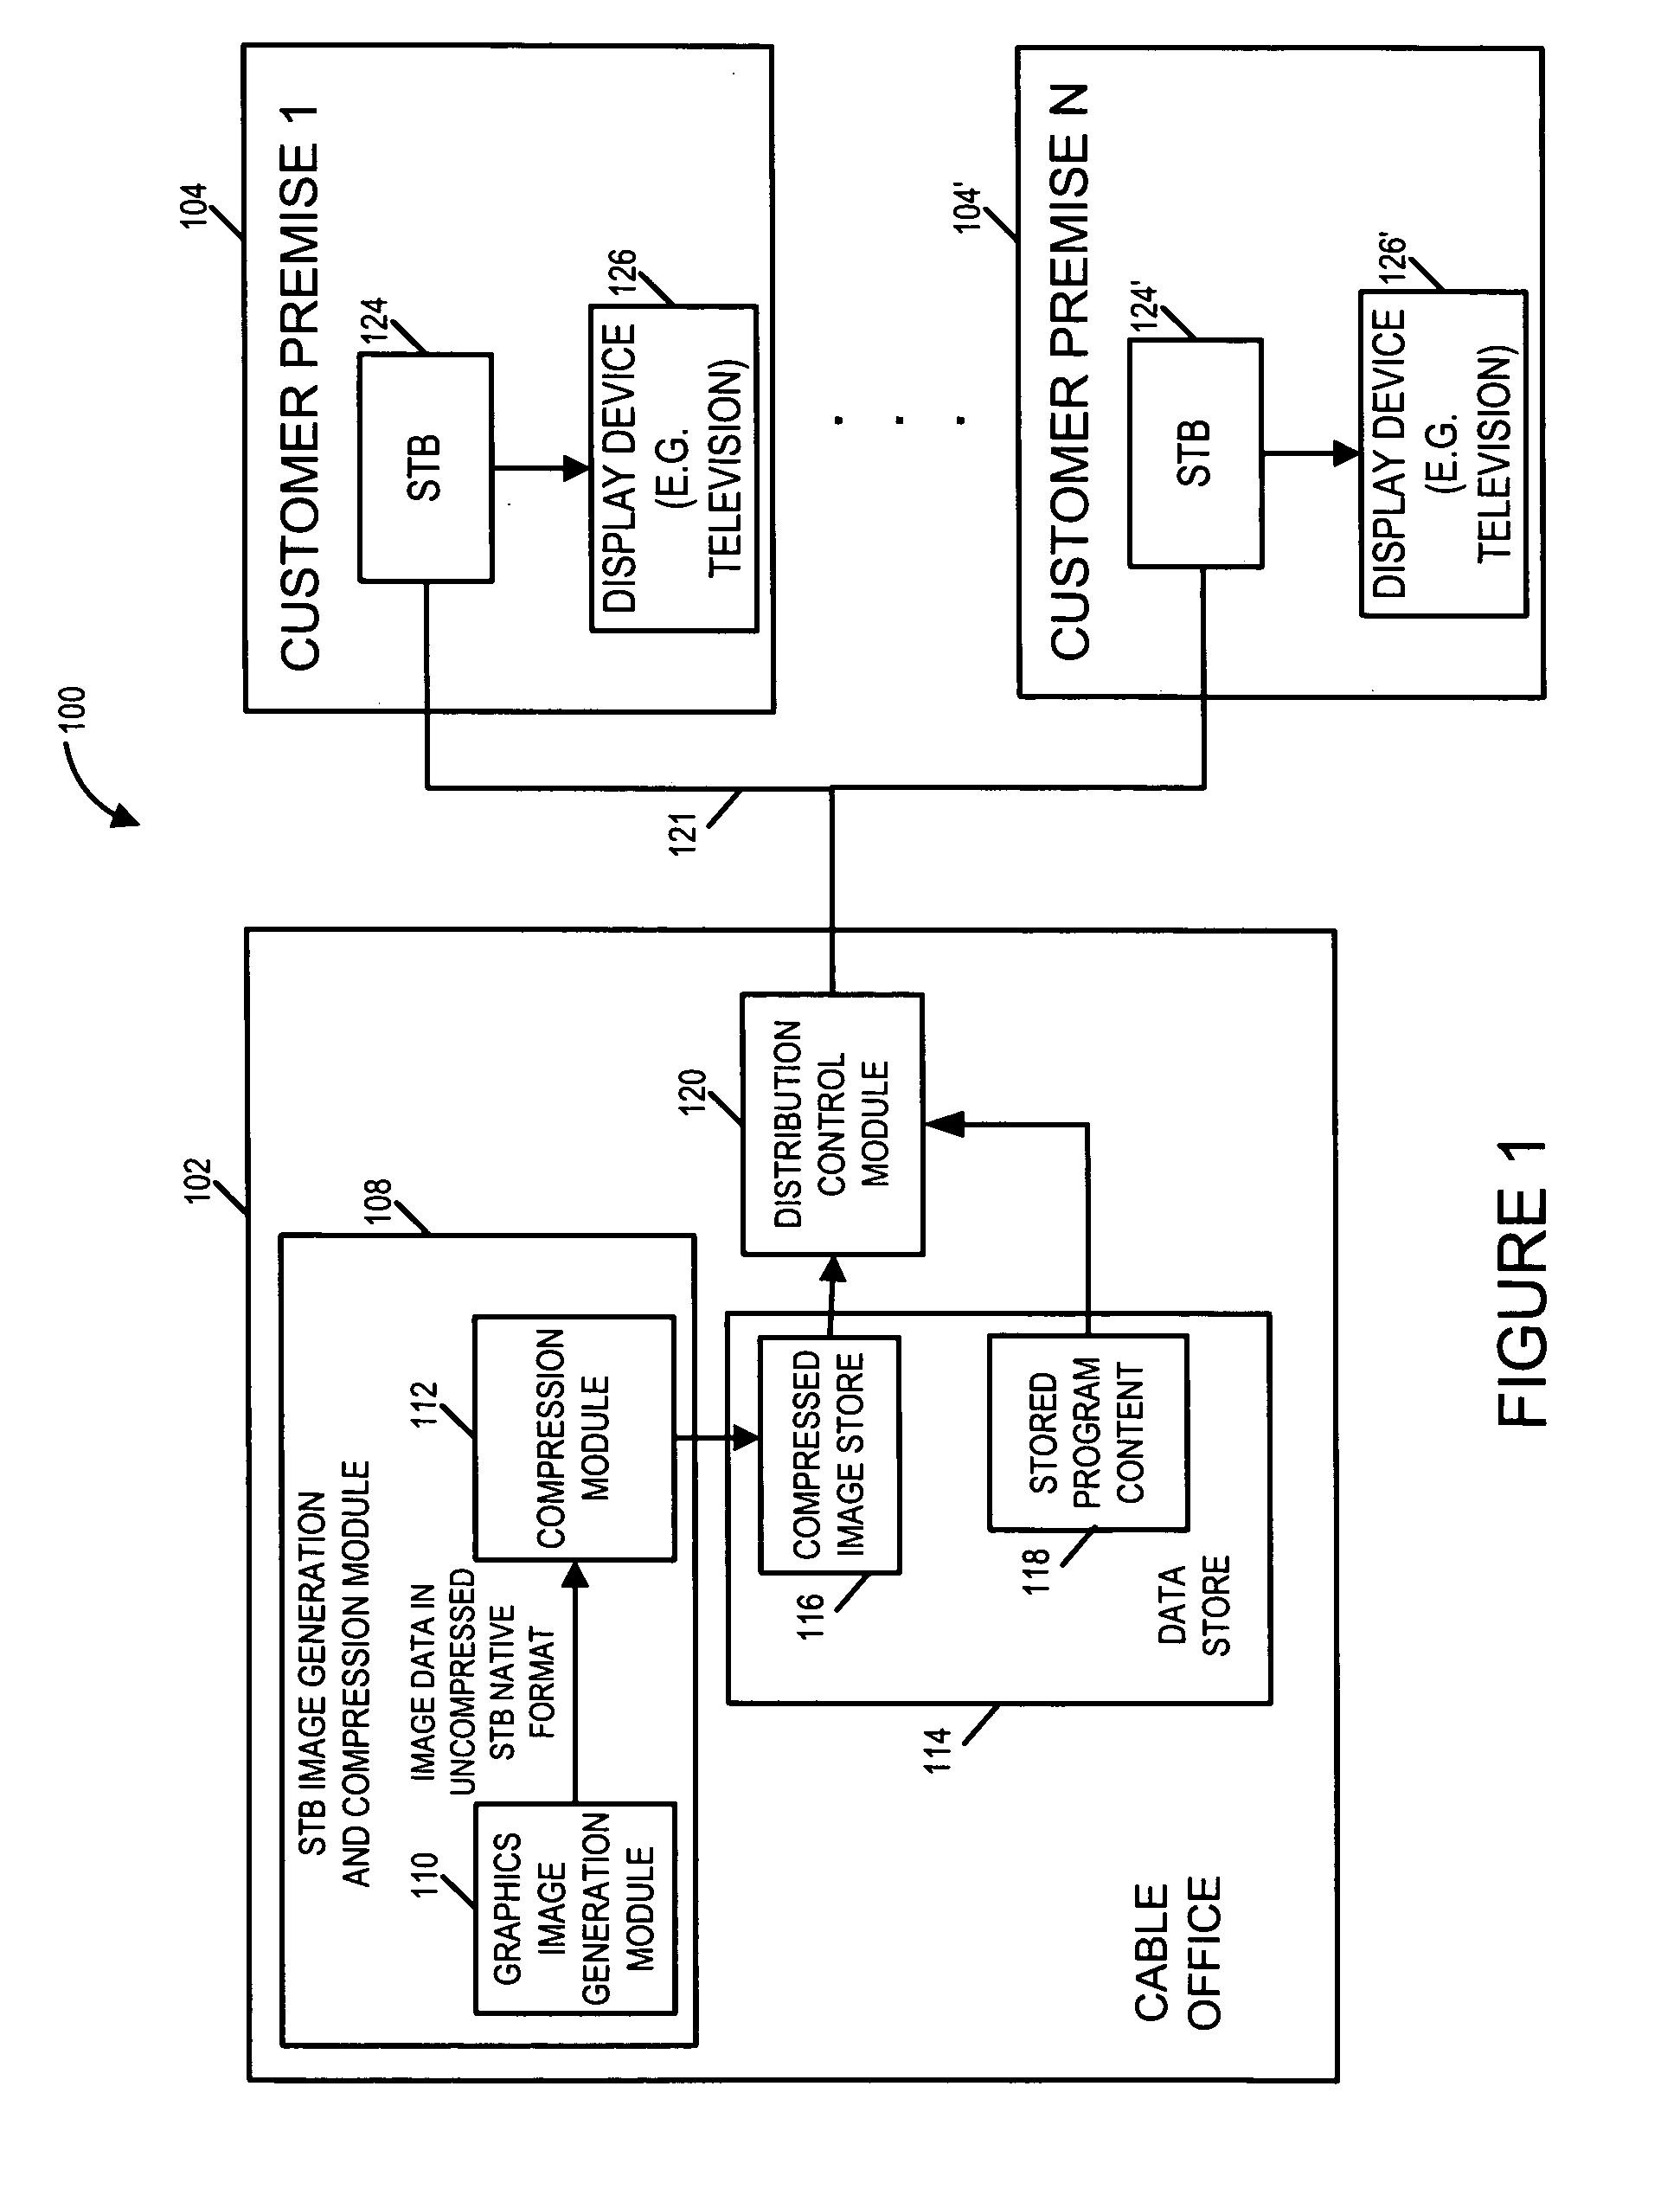 Methods and apparatus for encoding and decoding images